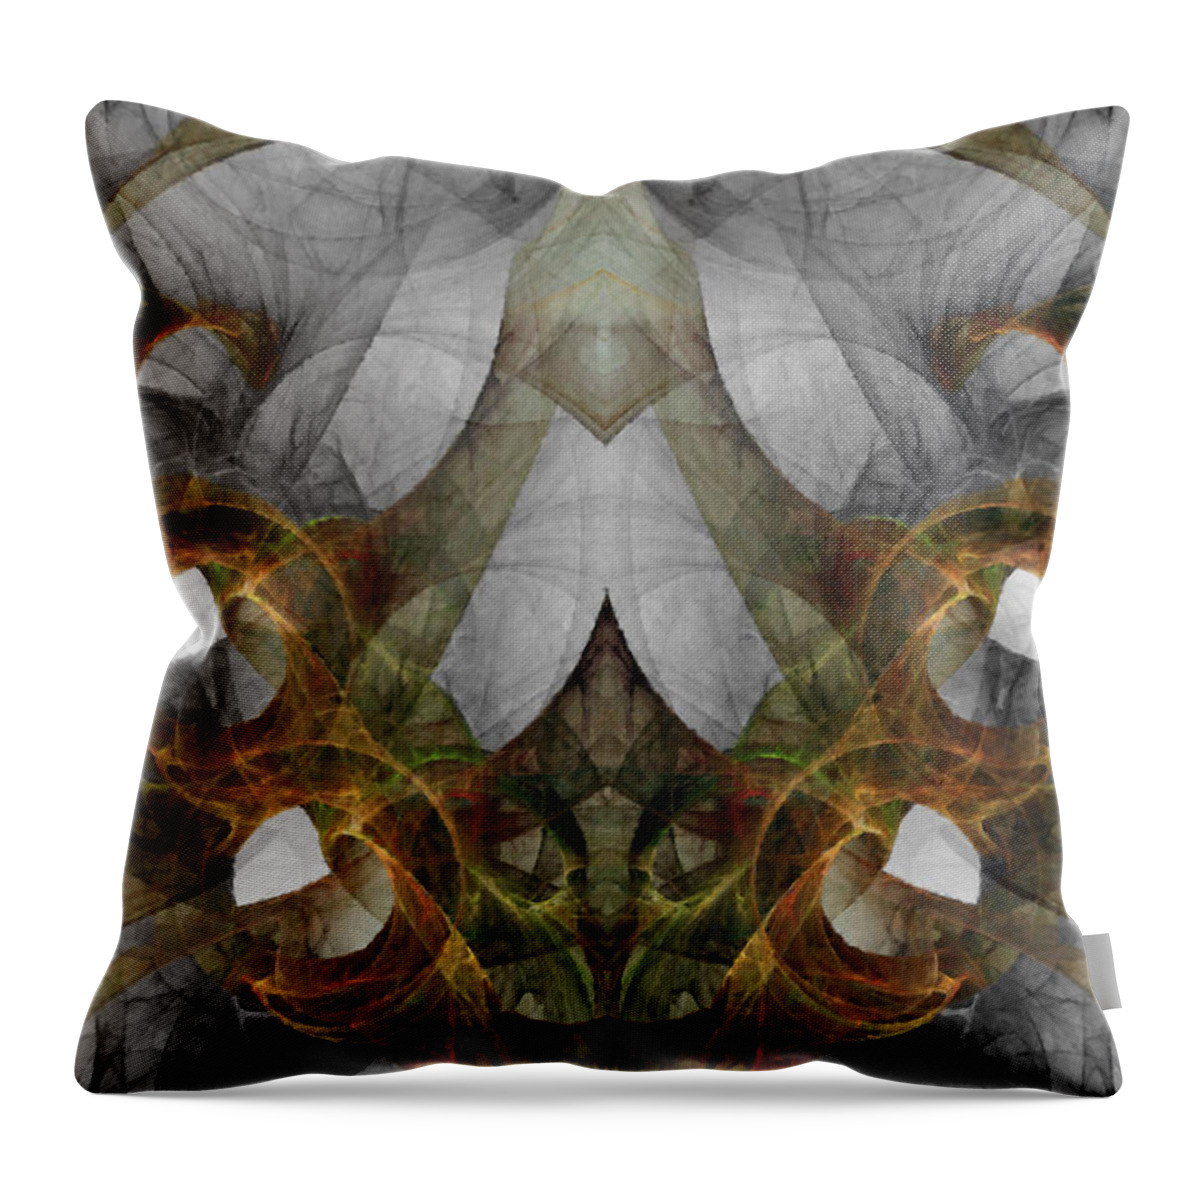 Abstract Throw Pillow featuring the digital art The Second Labor Of Herakles by Nirvana Blues